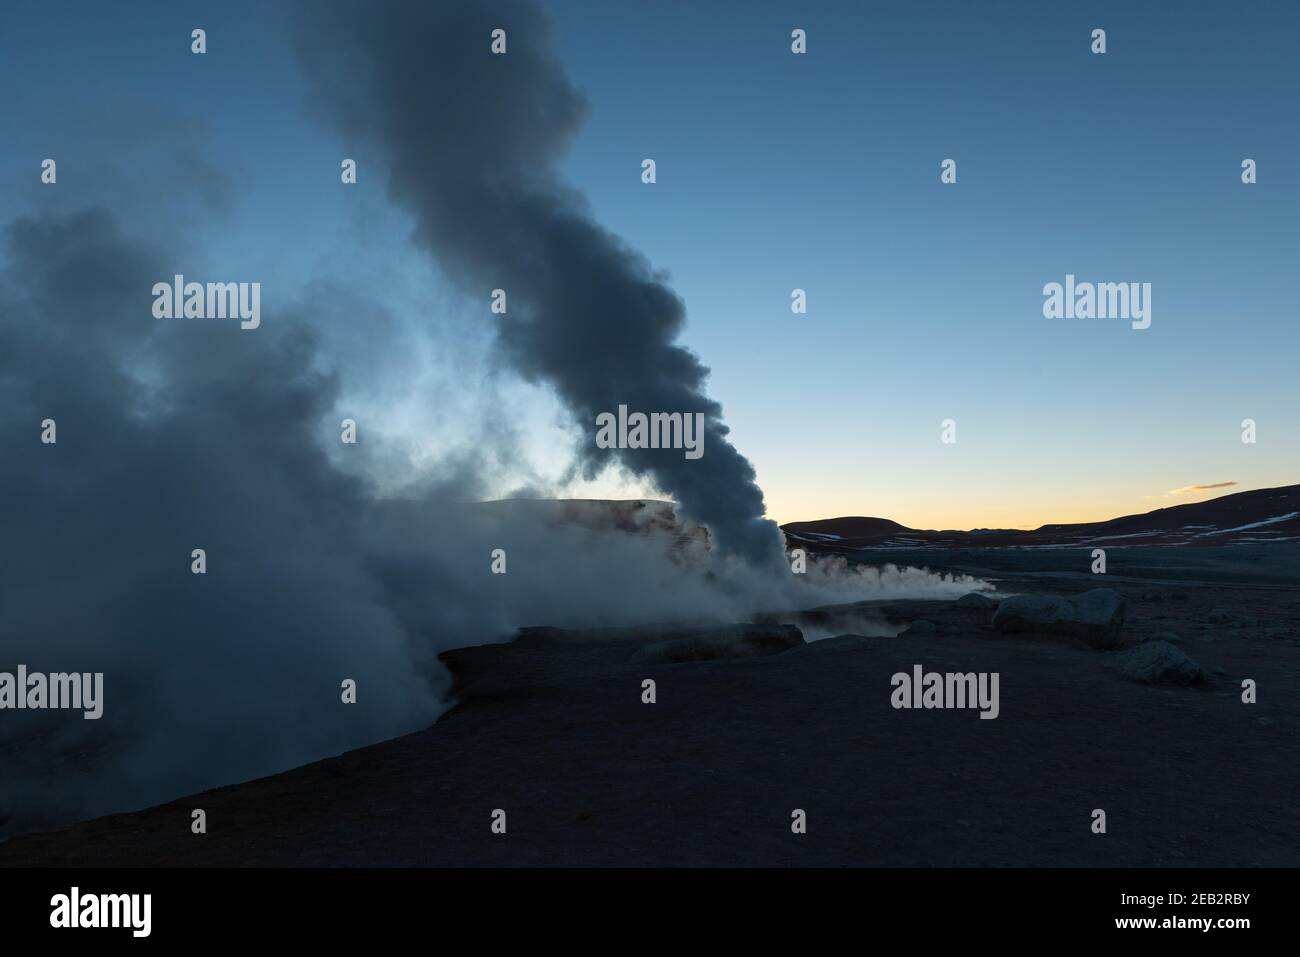 Volcanic activity at sunrise with fumarole and geyser steam in the Andes mountains, Sol de Manana, Uyuni, Bolivia. Stock Photo